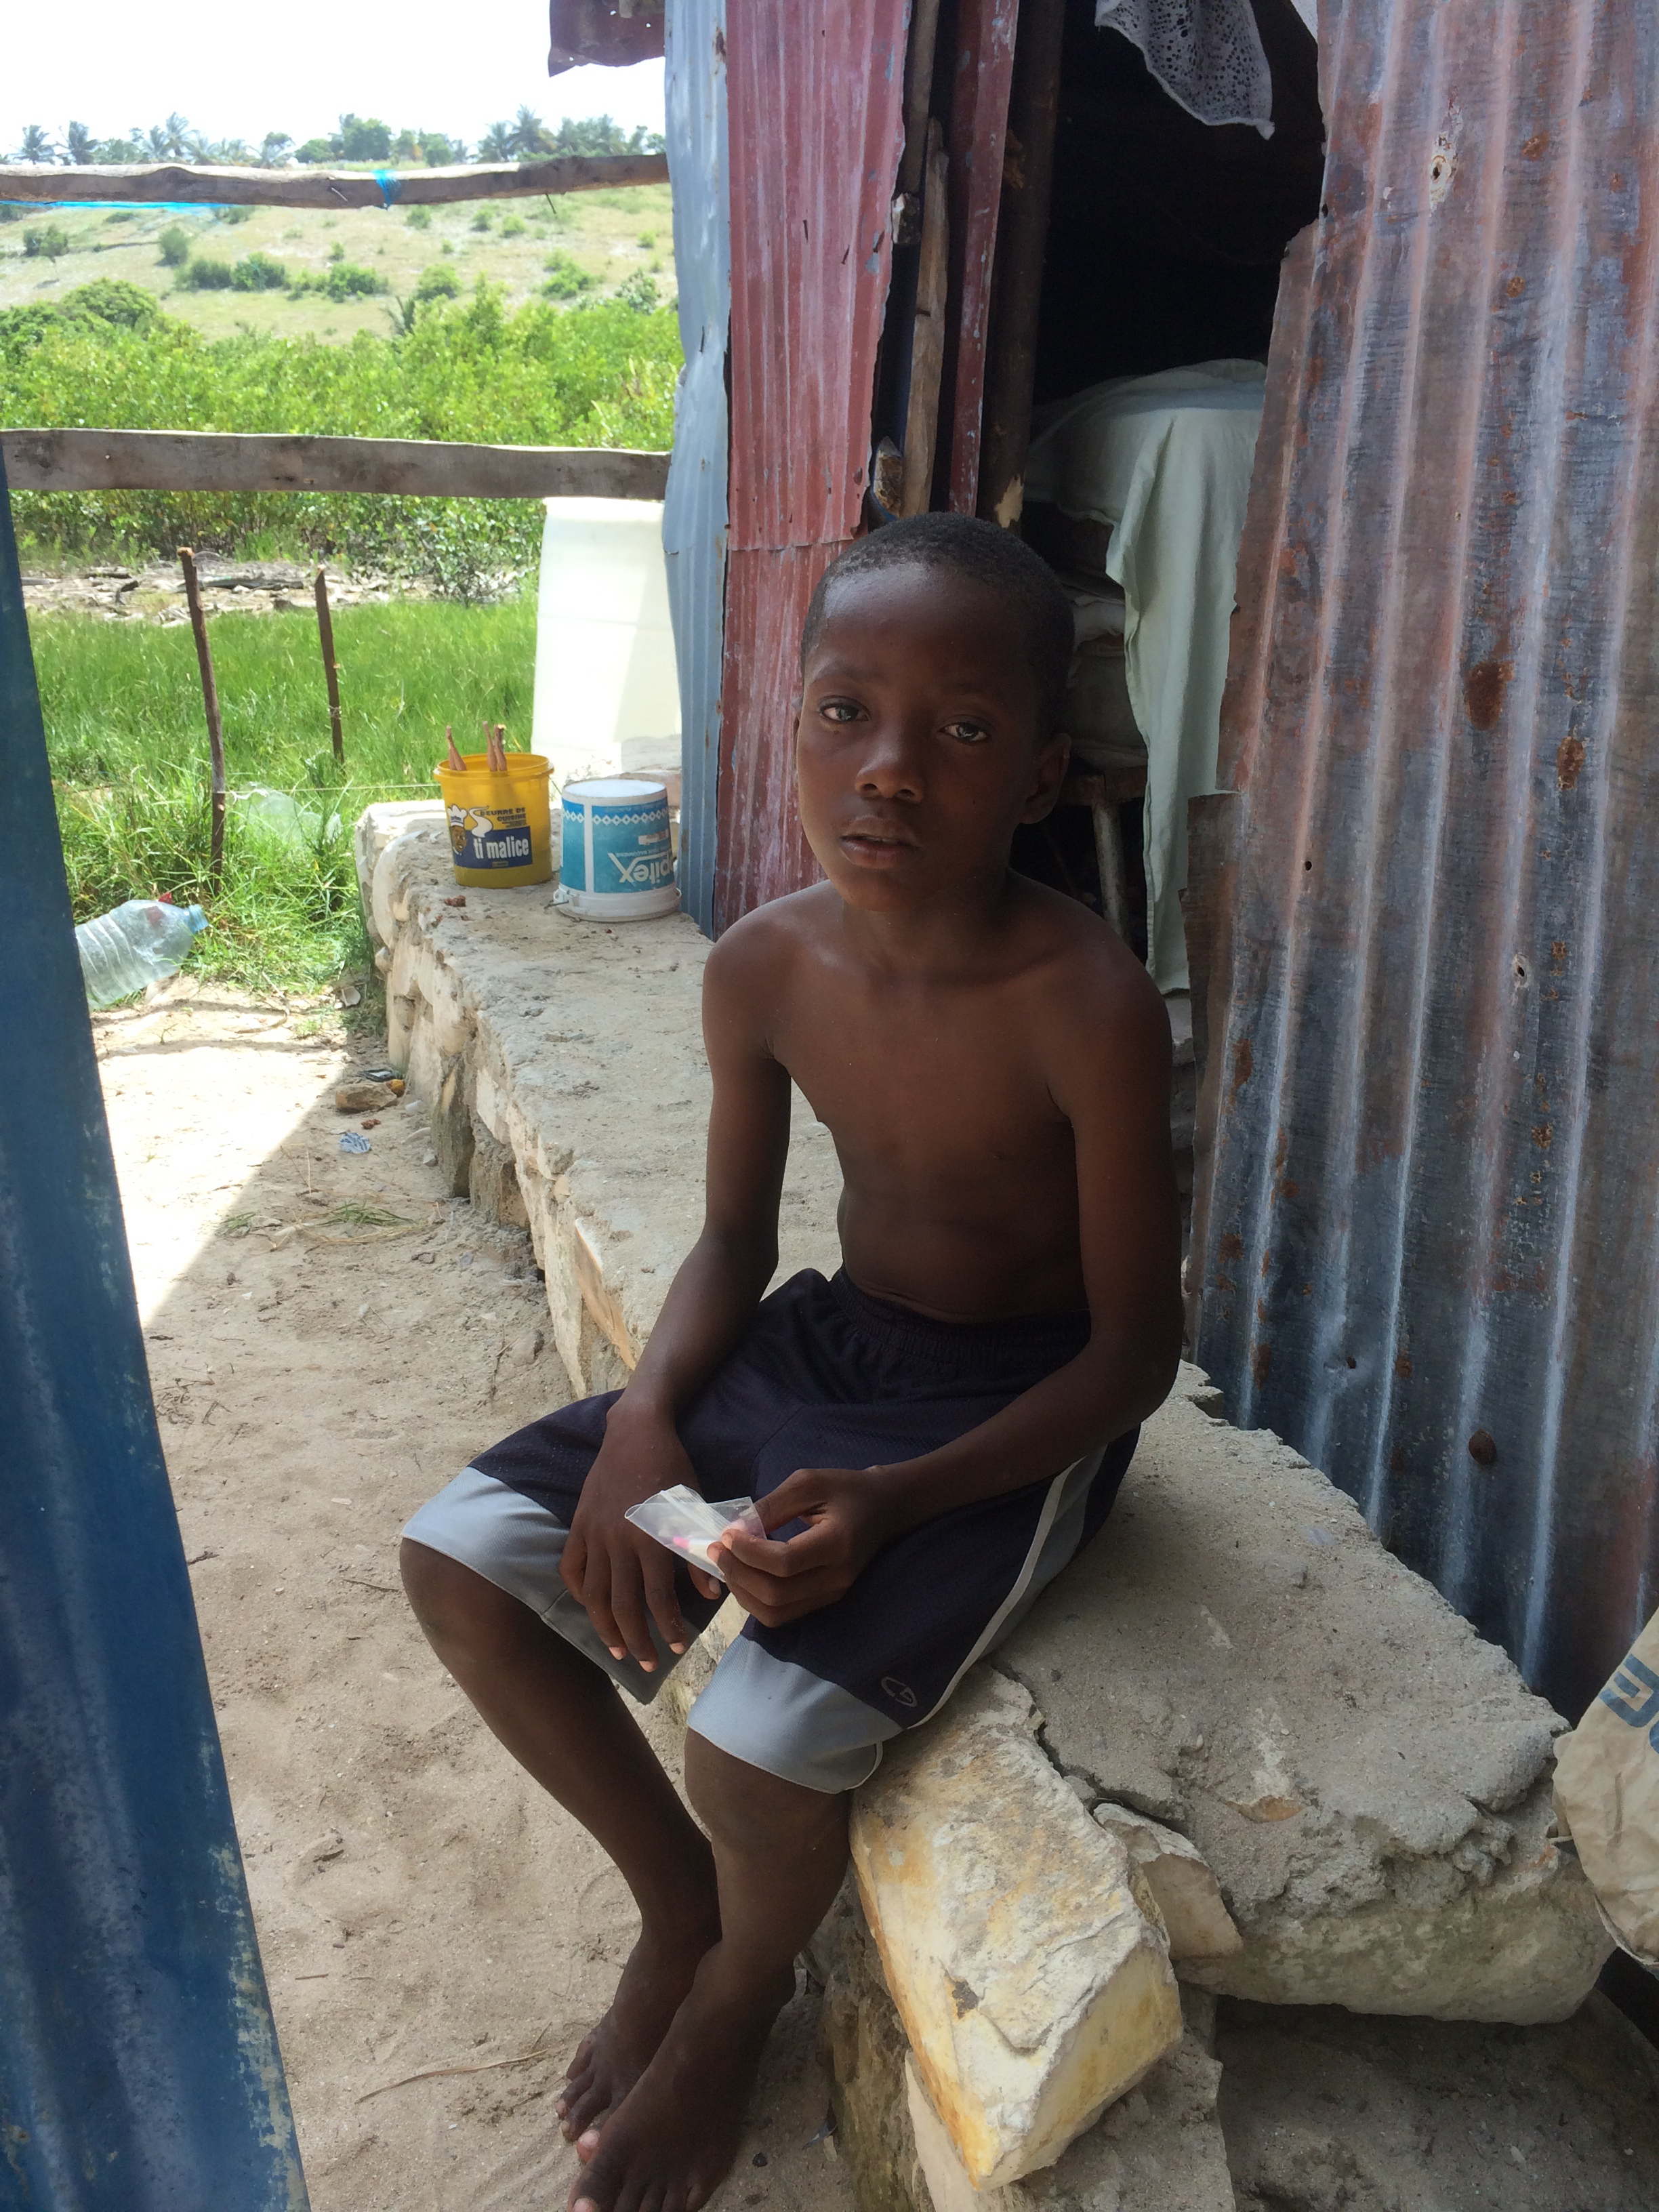 A little boy with his medicine for Chikungunya.